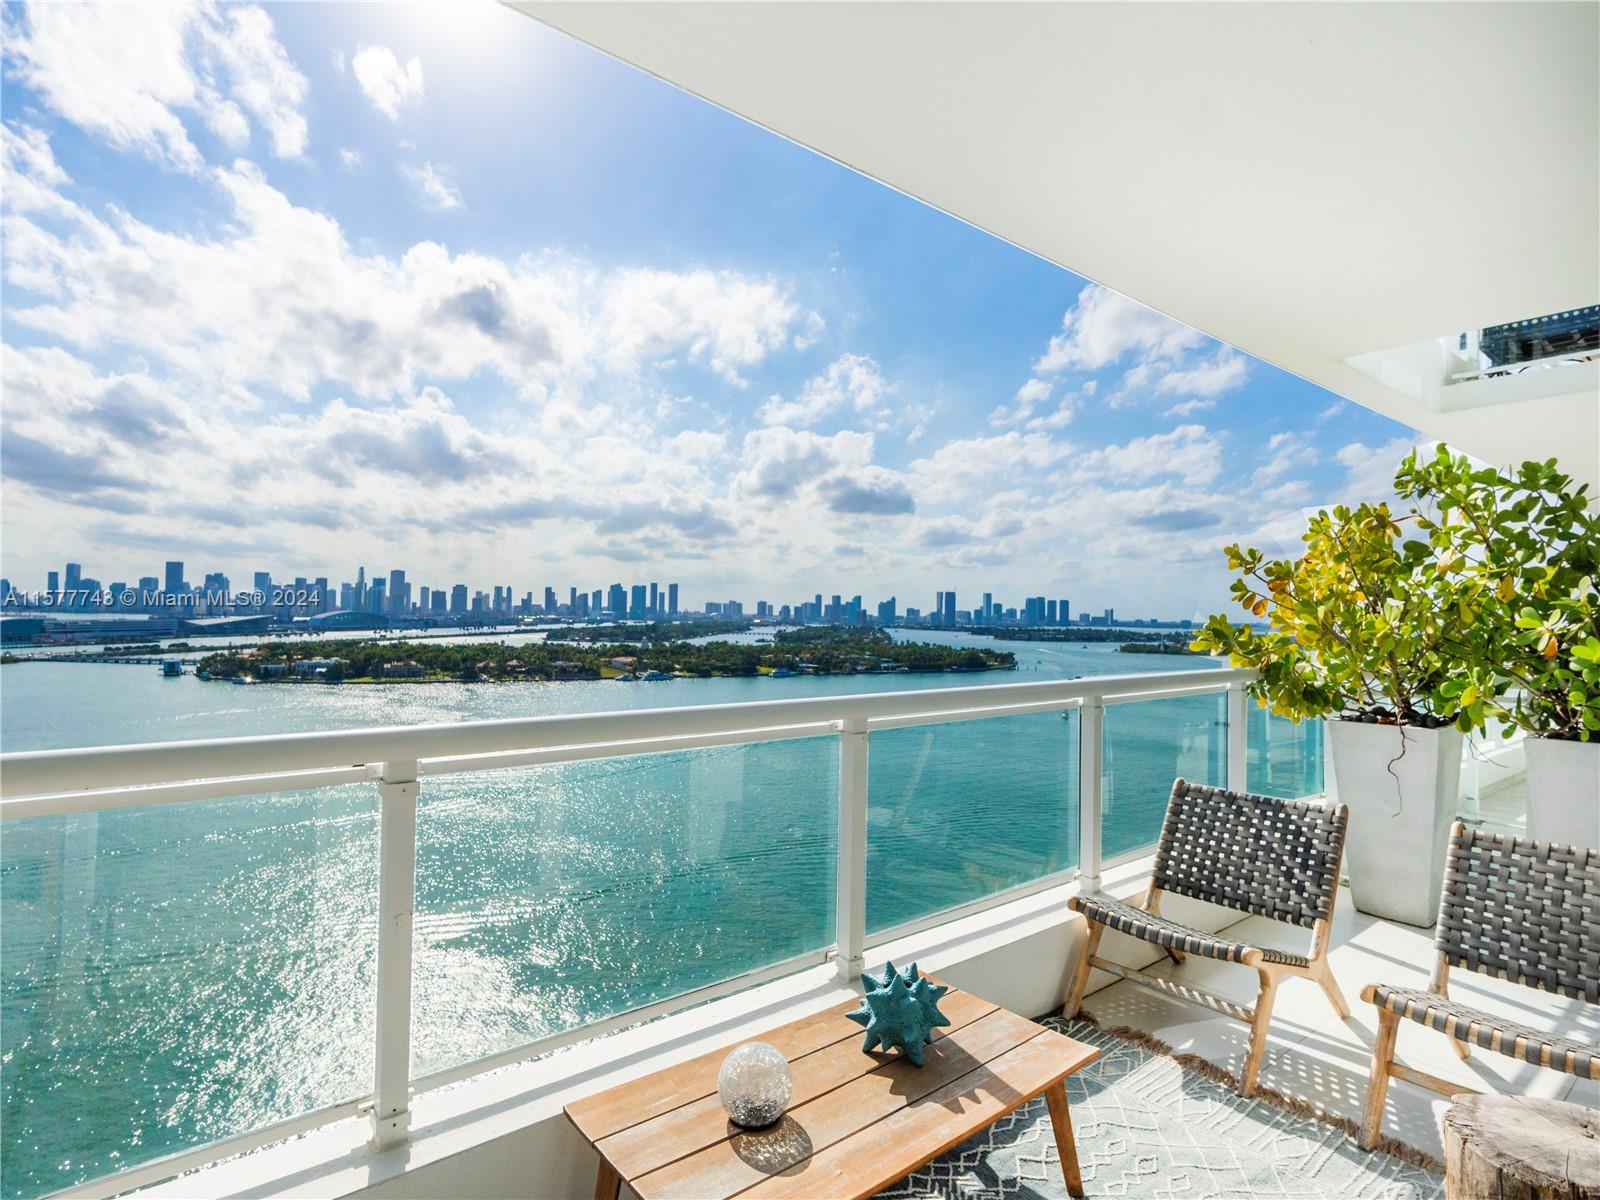 Beautifully appointed 1-bedroom, 1-bathroom residence in the prestigious Bentley Bay North Tower boasting breathtaking views of Biscayne Bay and the iconic Downtown Miami skyline. This unit offers a cozy living space, floor to ceiling windows overlooking the bay from each room, and a walk-in closet in the primary suite. Bathroom includes a standing shower, separate soaking tub, and bidet. Residents enjoy round-the-clock security, concierge services, valet parking, and top-tier amenities such as a beautiful pool, two jacuzzis, sauna, steam room, and a recently upgraded fitness center. Conveniently situated across from the newly developed 3-acre West Ave Miami Beach Park. Unit is Tenant Occupied until August 31, 2024.